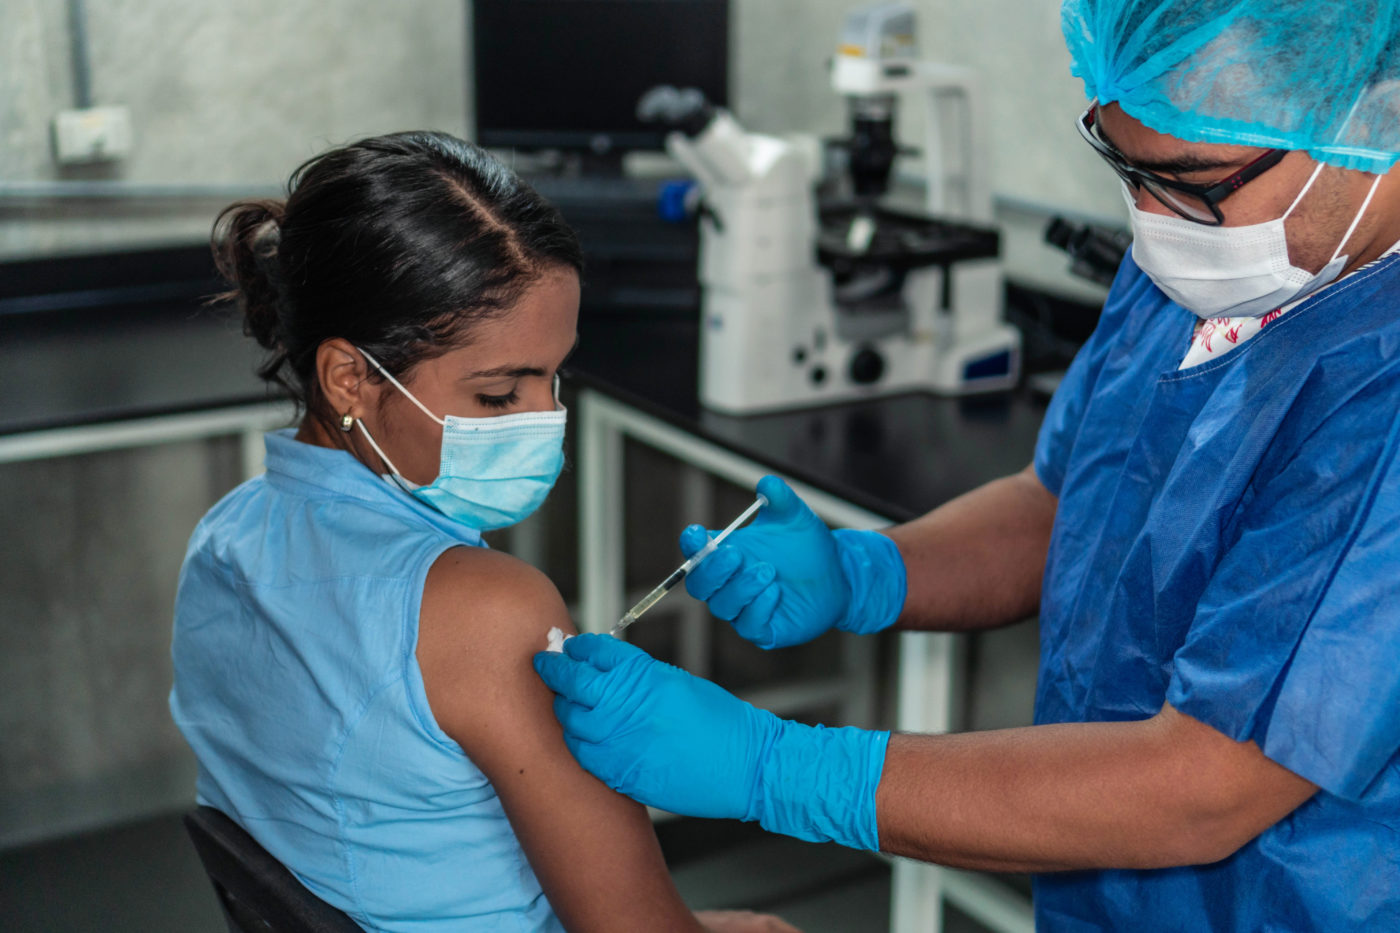 Top 6 Reasons For Not Getting Vaccinated That Don’t Hold Up